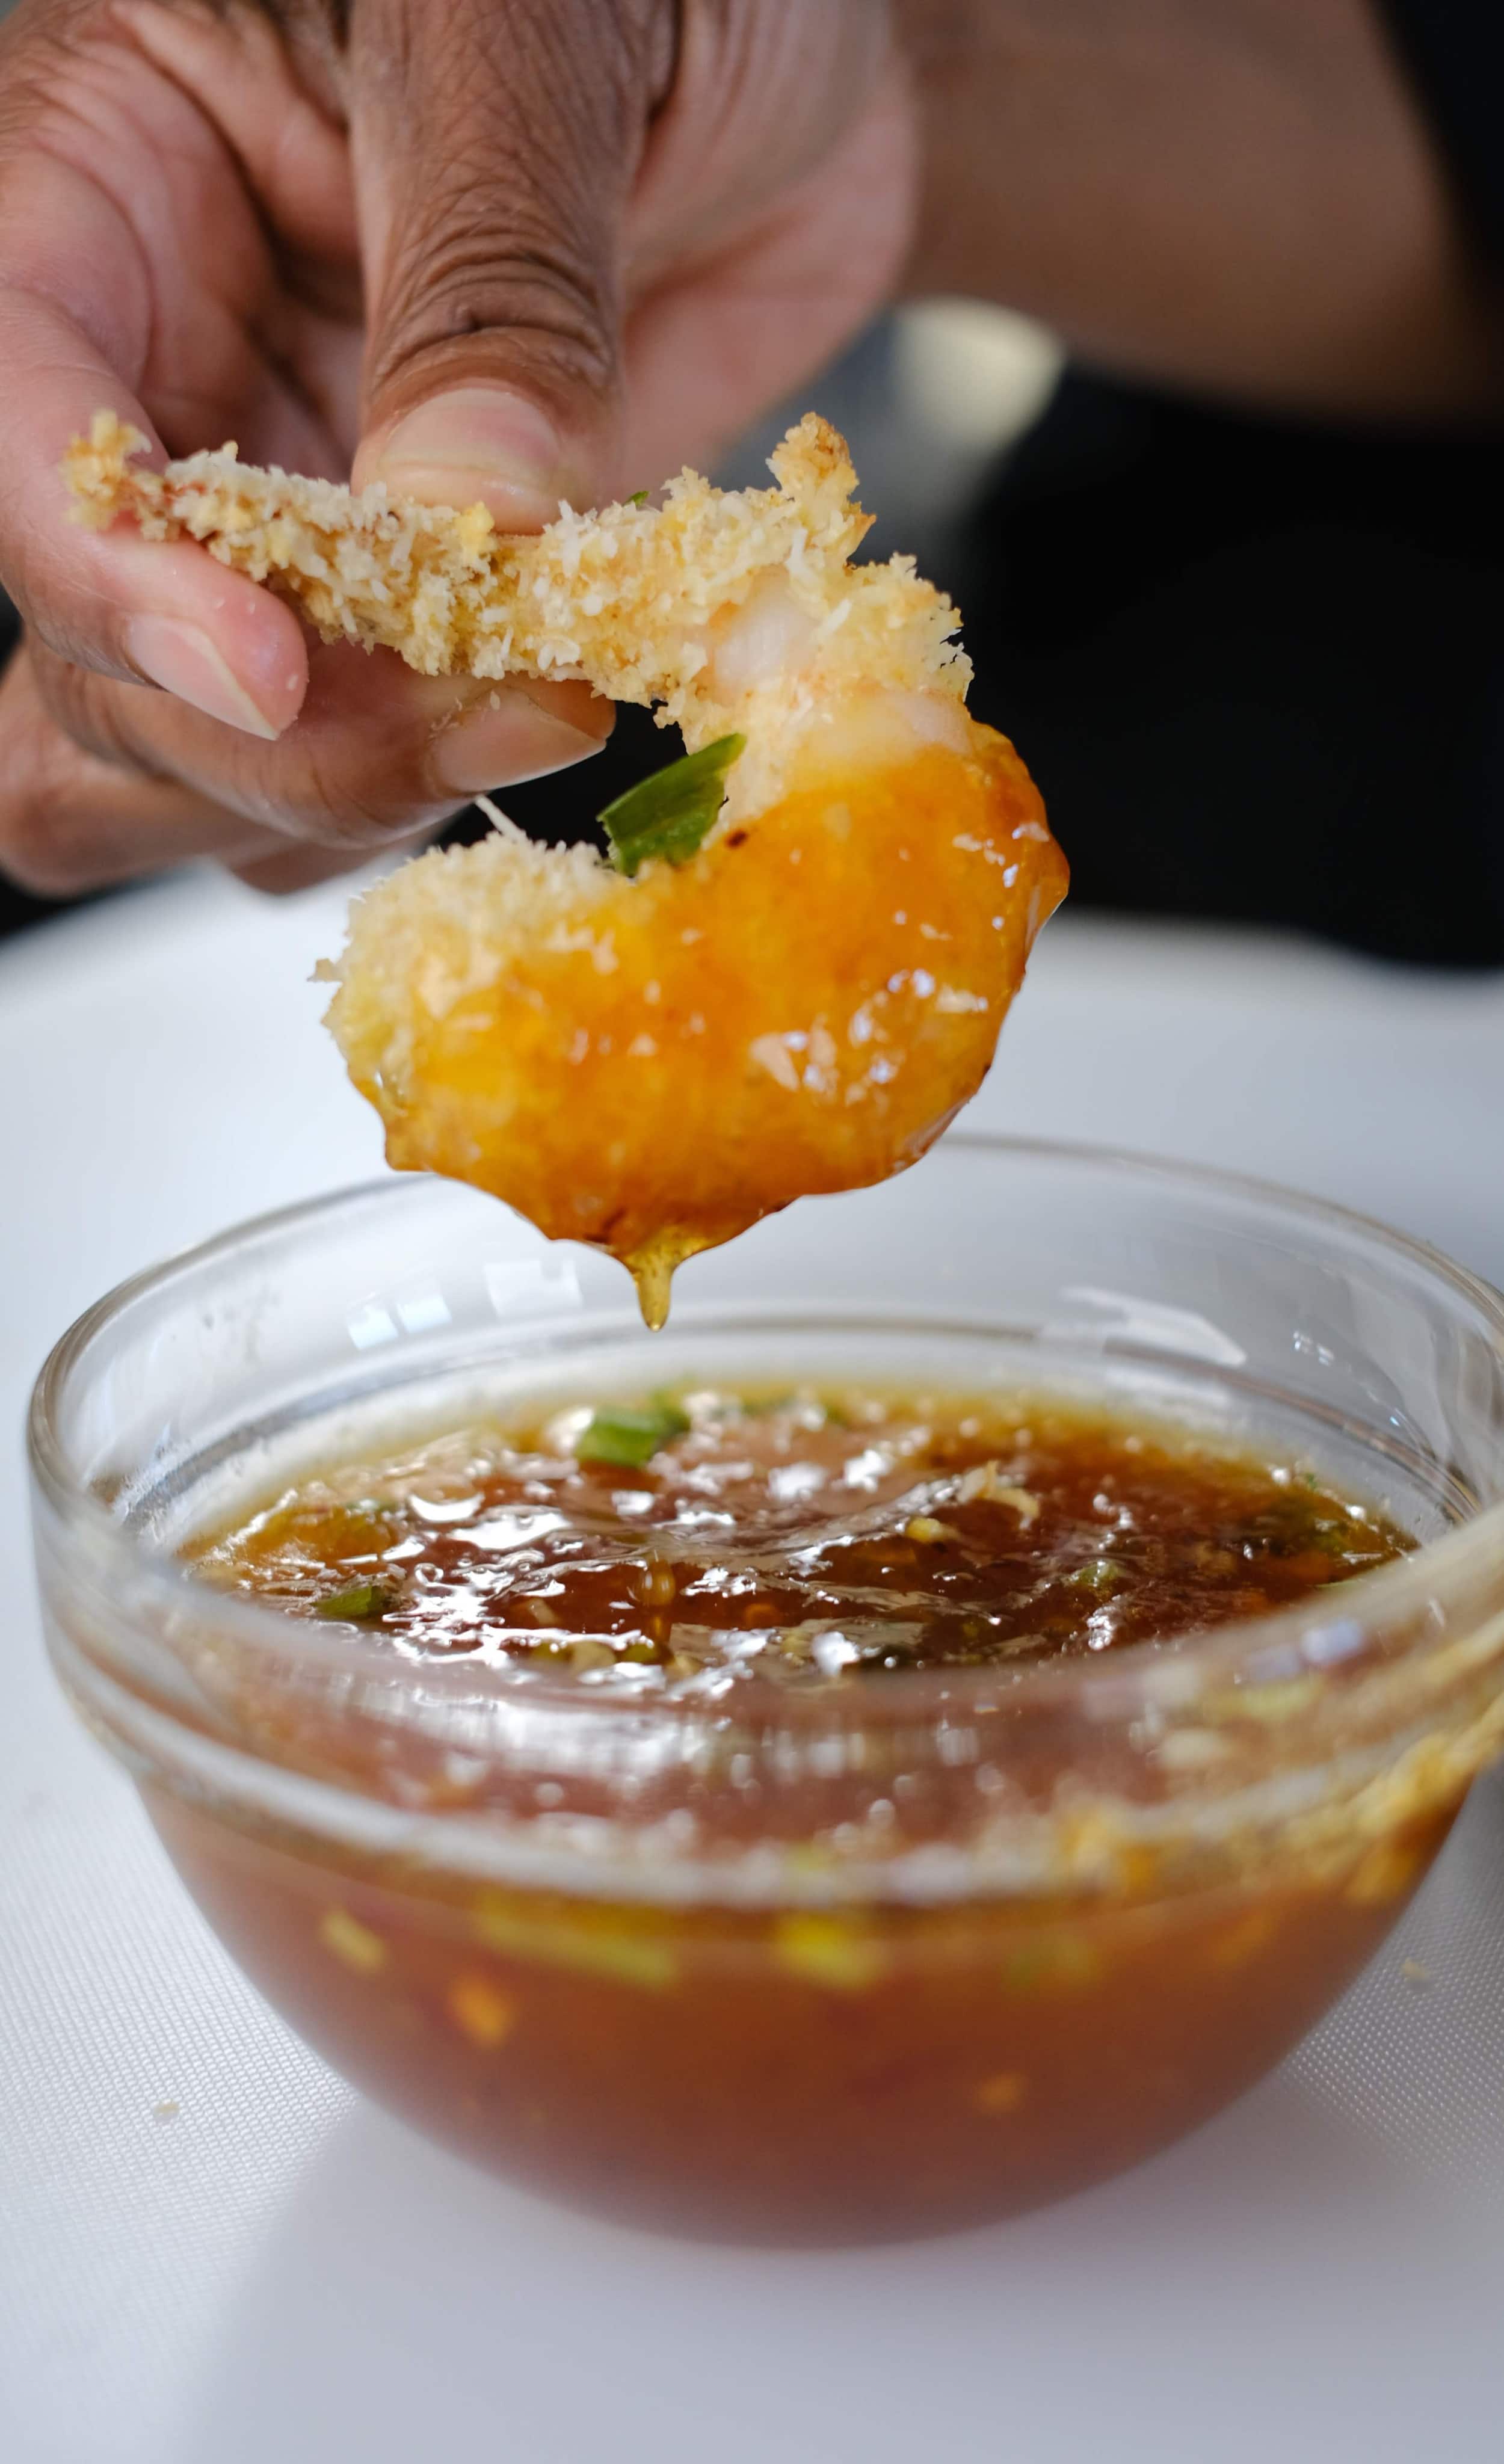 coconut shrimp being dipped in chili sauce